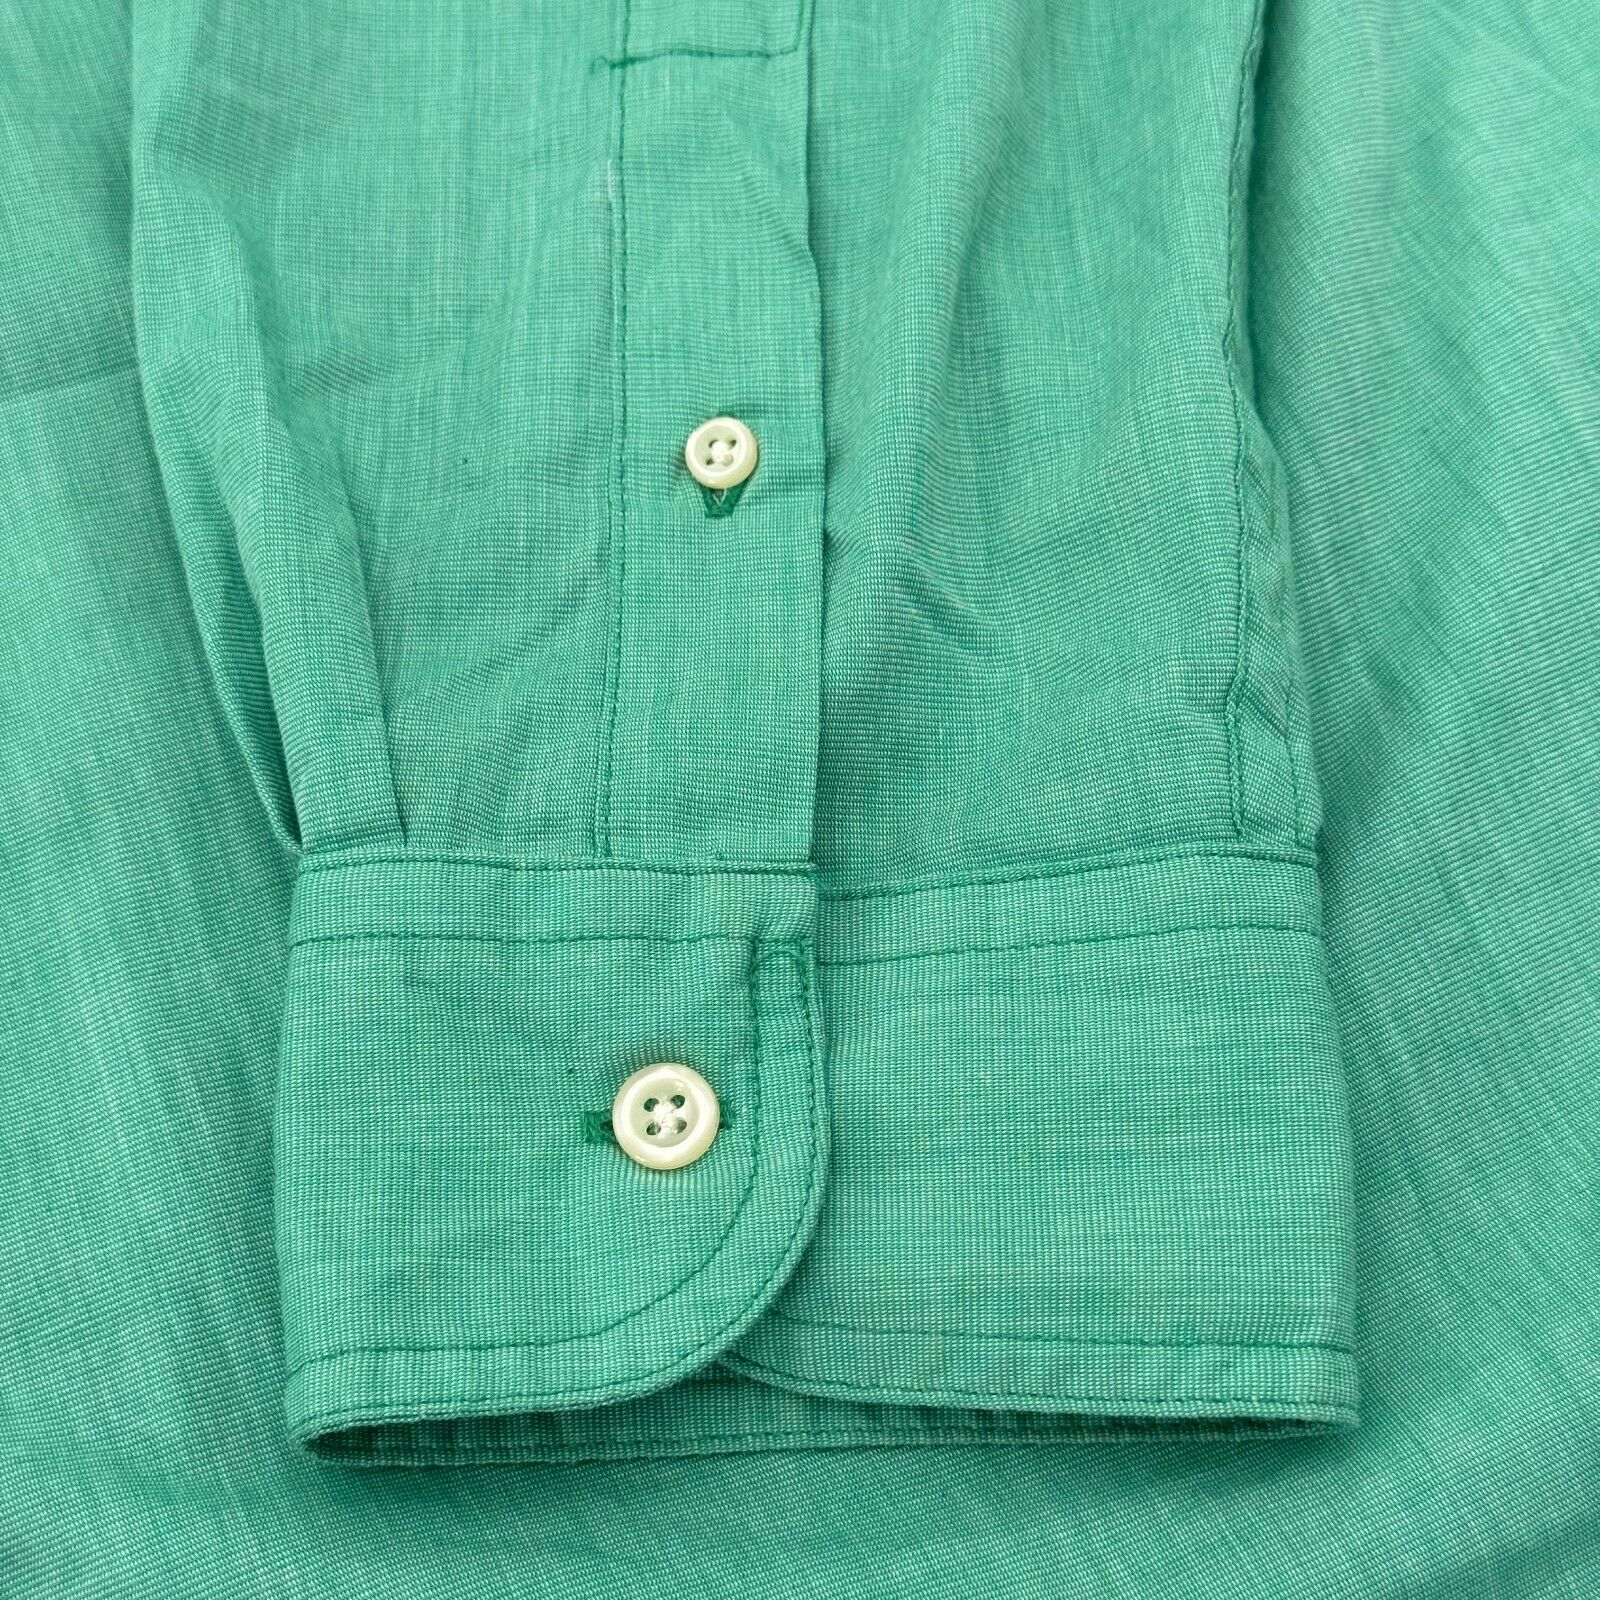 Chaps Easy Care Button Up Shirt Short Sleeve Green Mens XL